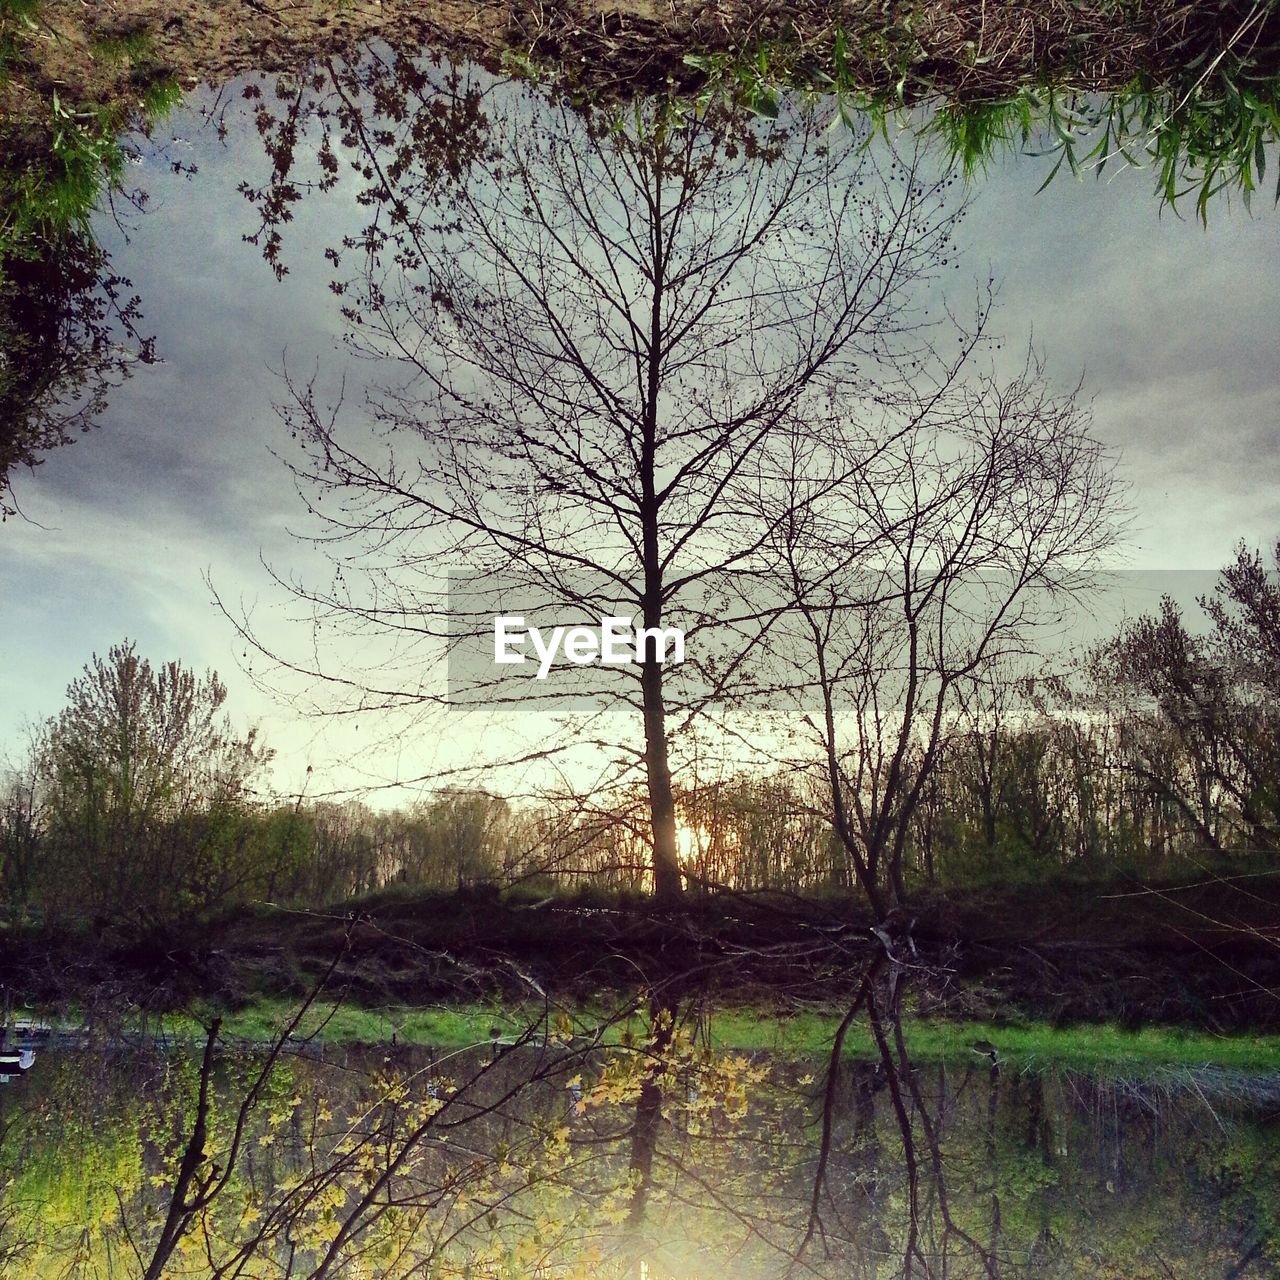 Upside down image of bare tree reflection in lake